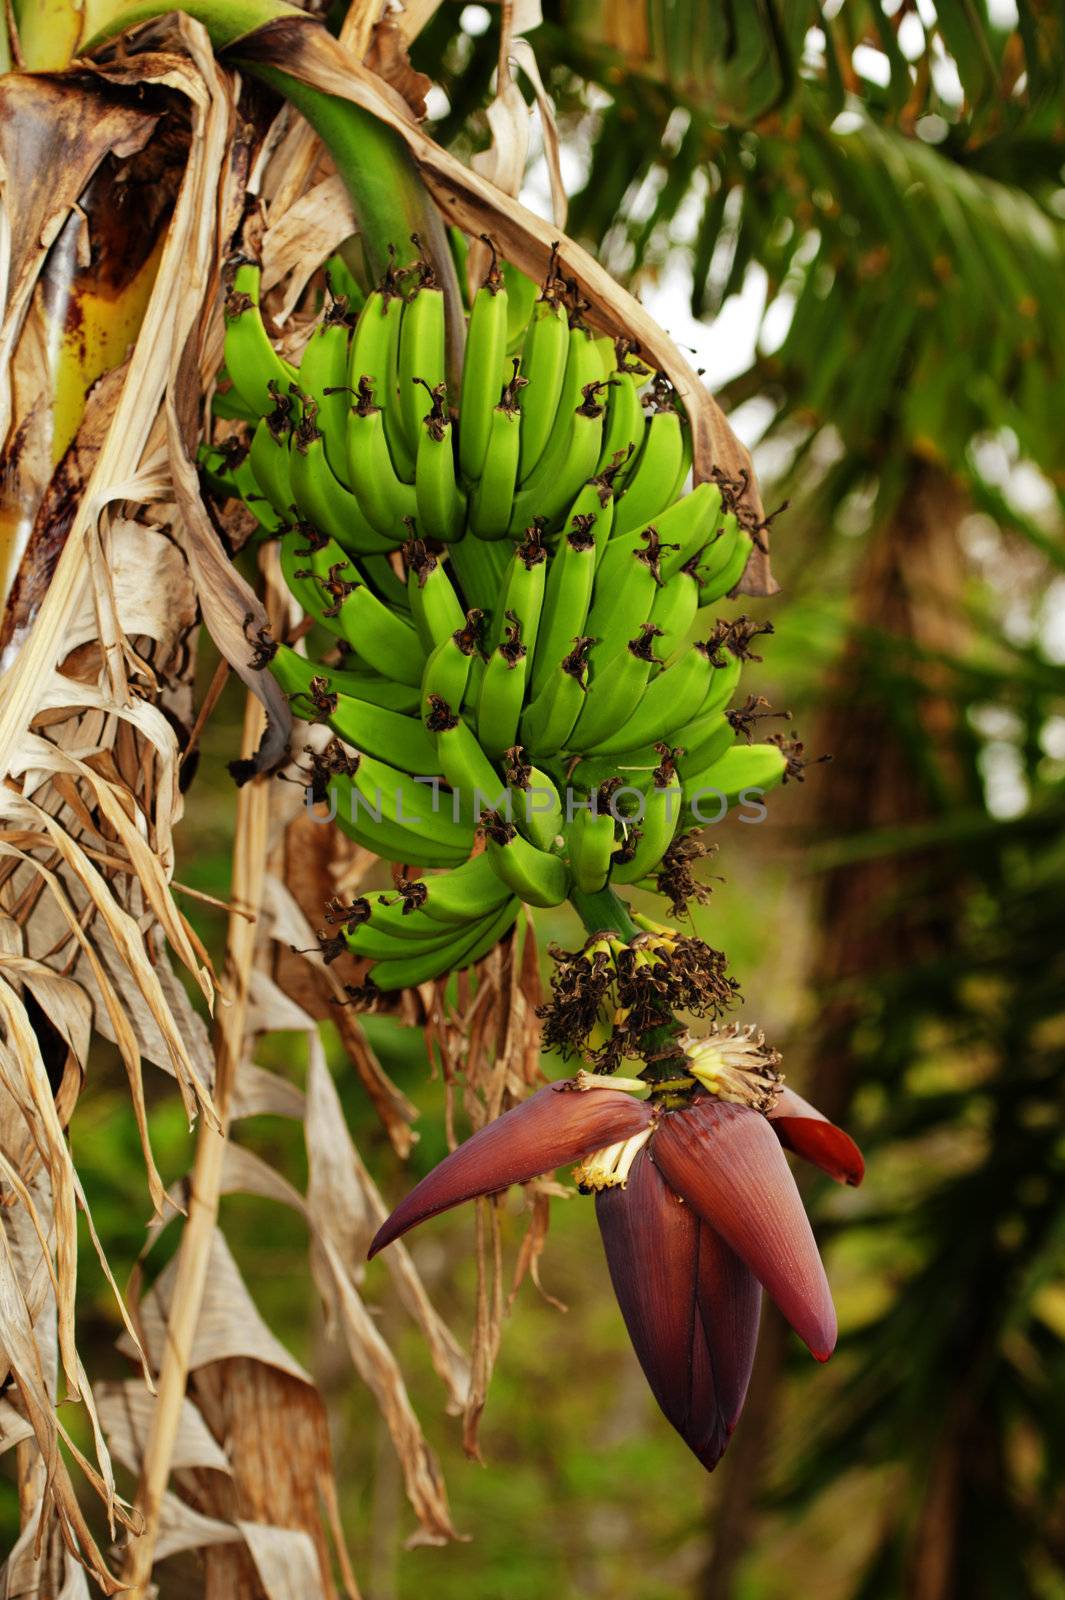 Bunch of Bananas by billberryphotography